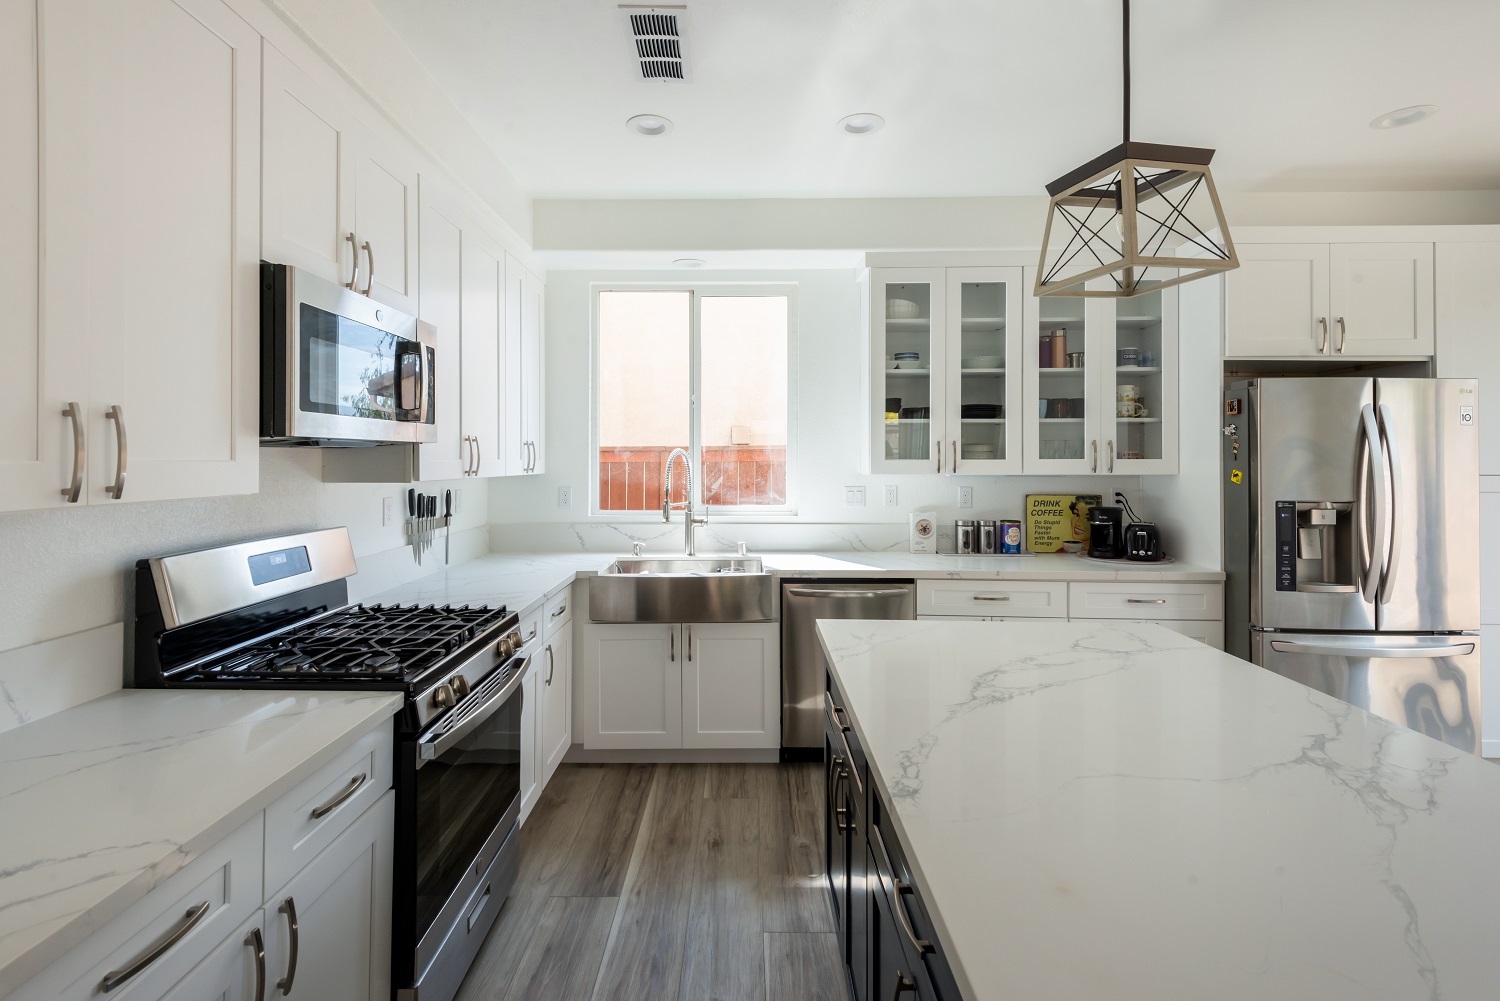 Kitchen Cabinets replacement service in San Diego